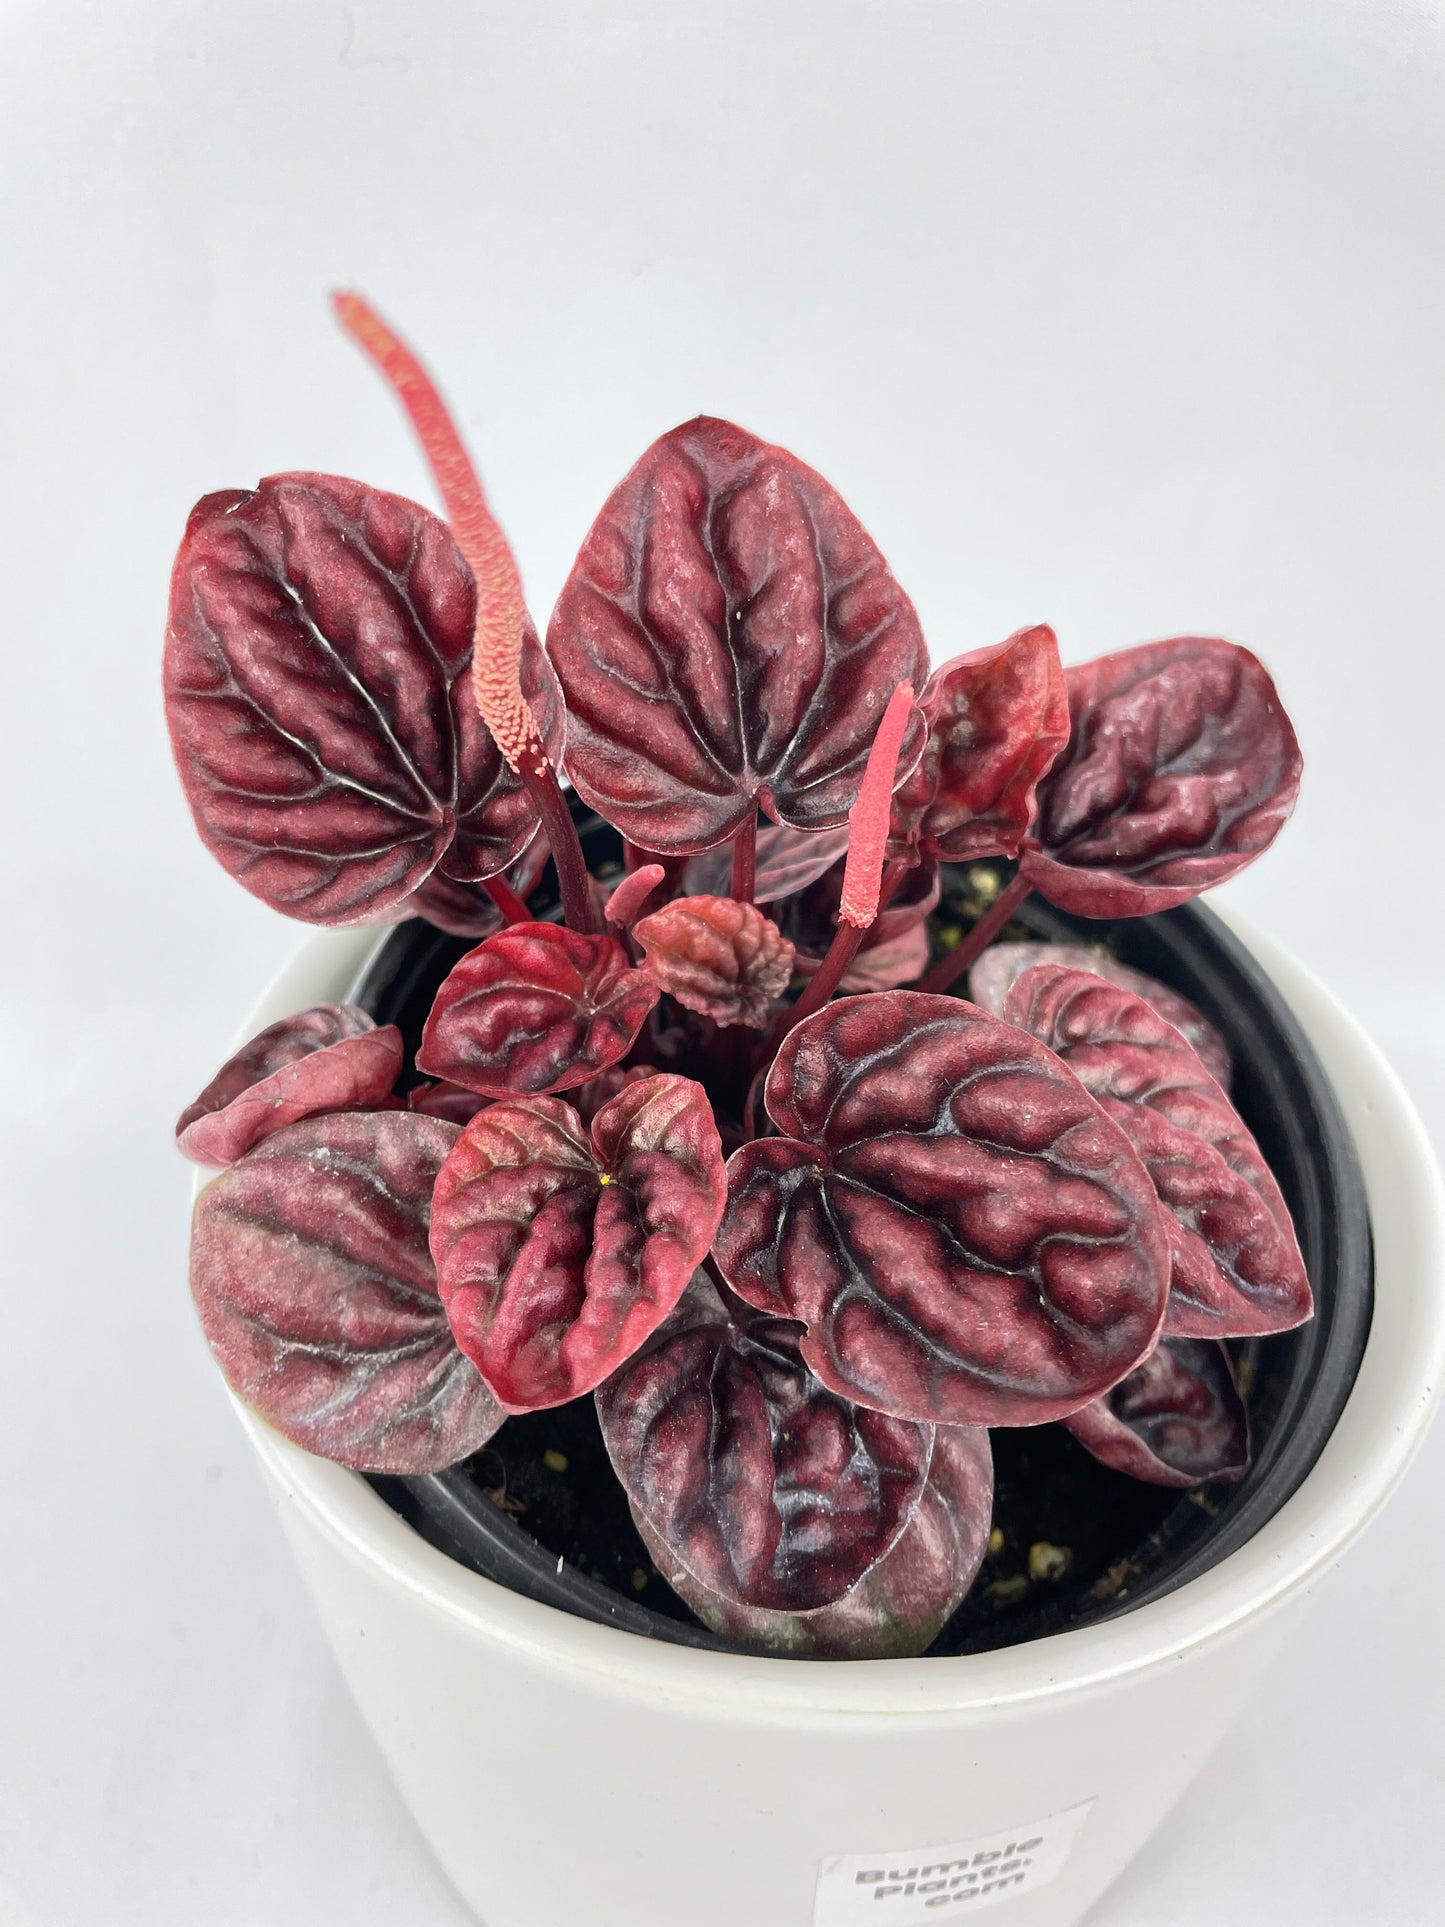 Peperomia Caperata 'Schumi Red' by Bumble Plants